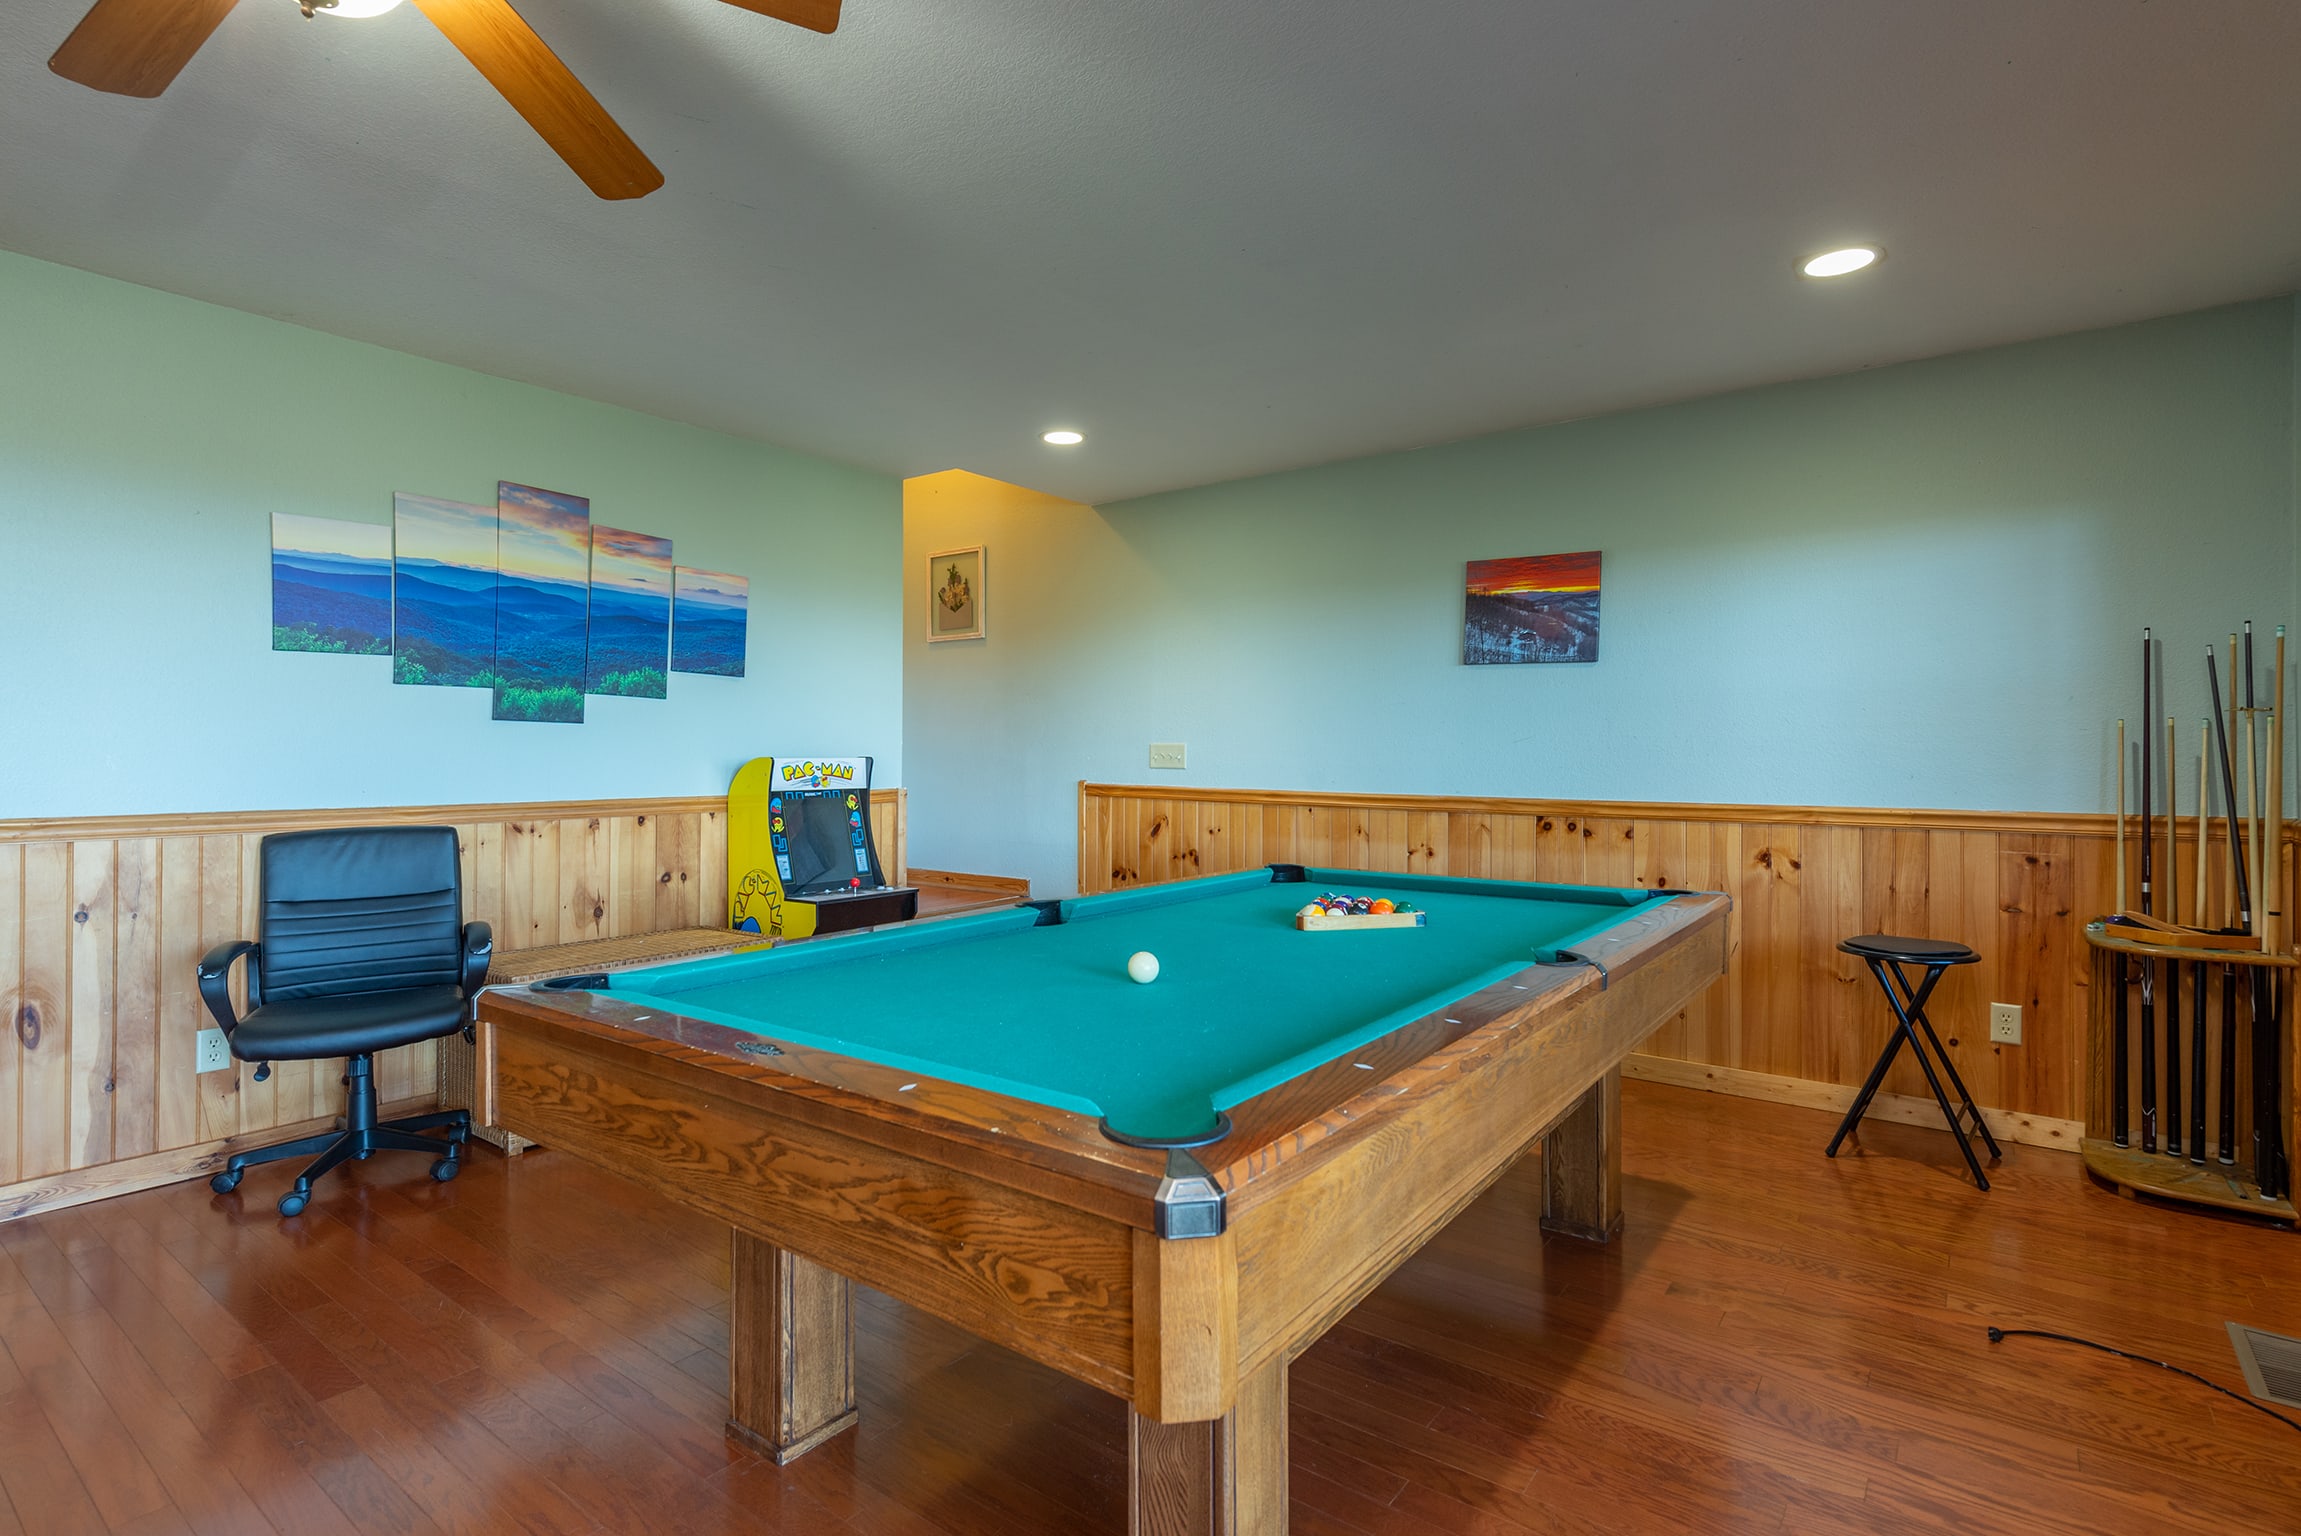 Play a game of pool in the game room!